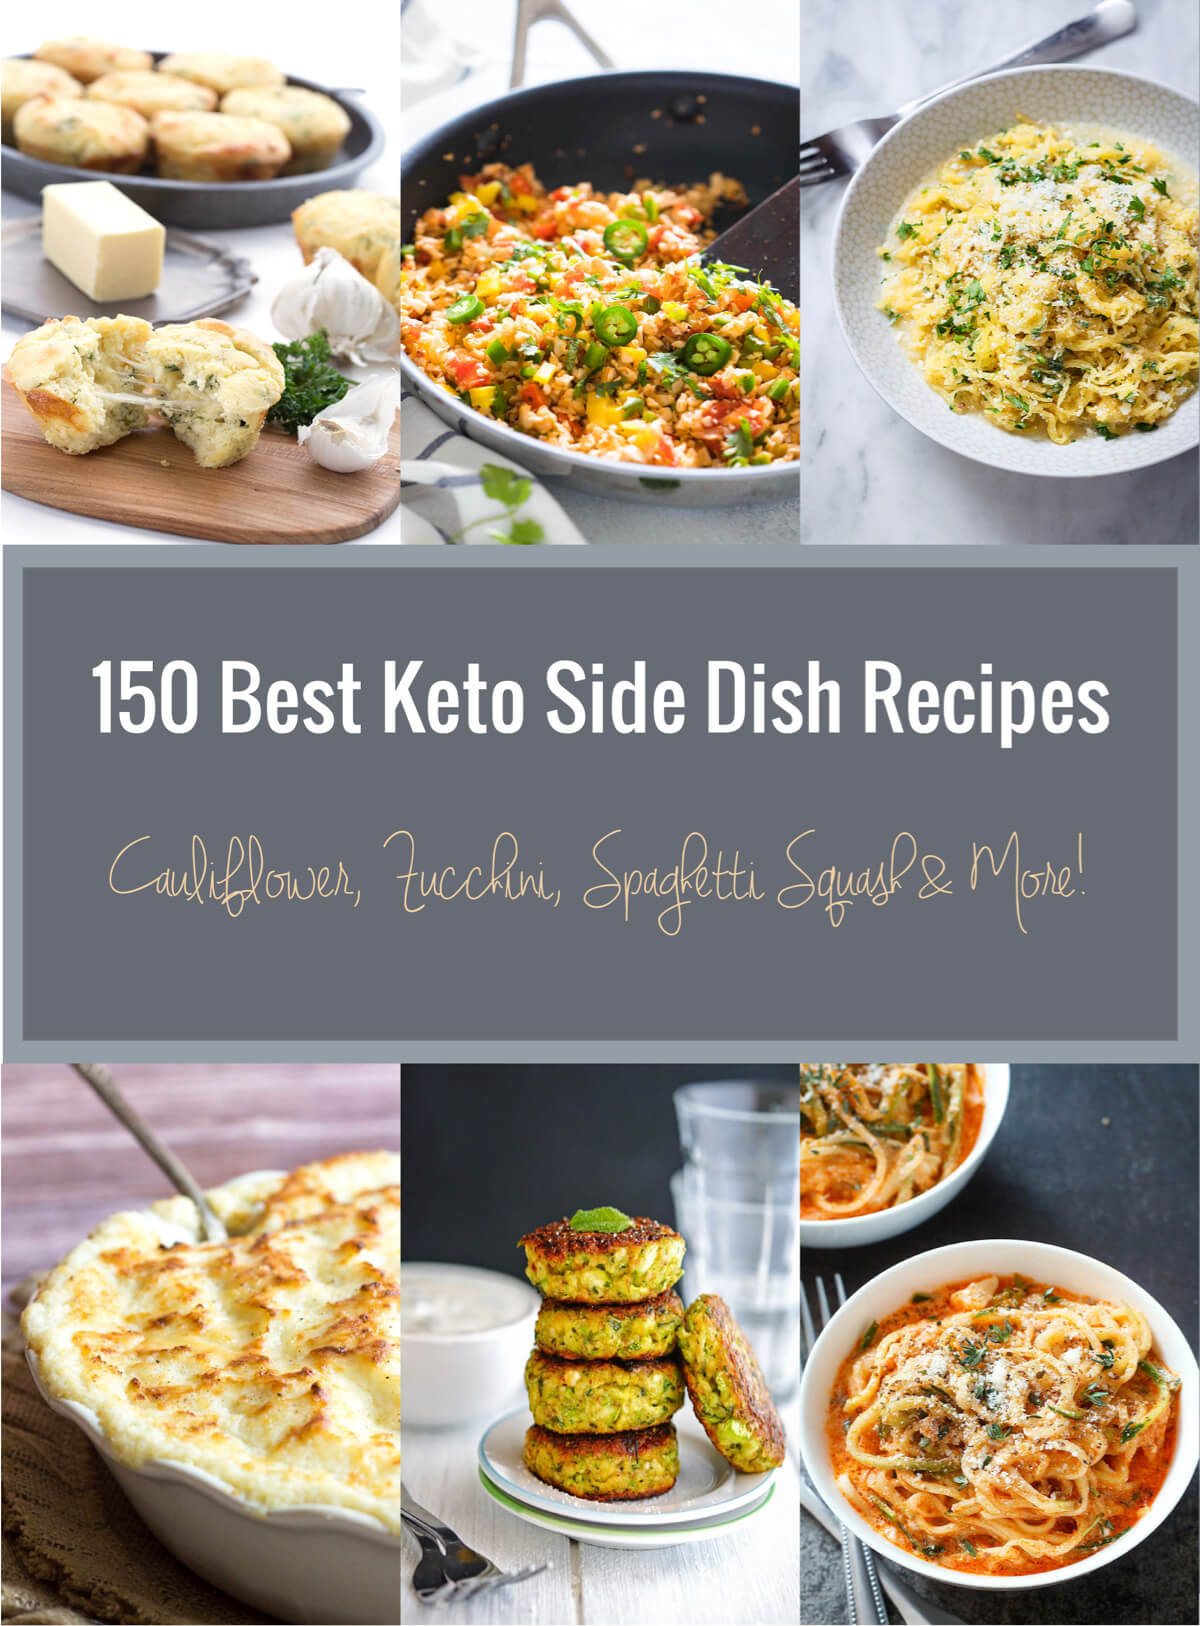 Low Carb Keto Side Dishes
 150 Best Keto Side Dish Recipes Low Carb